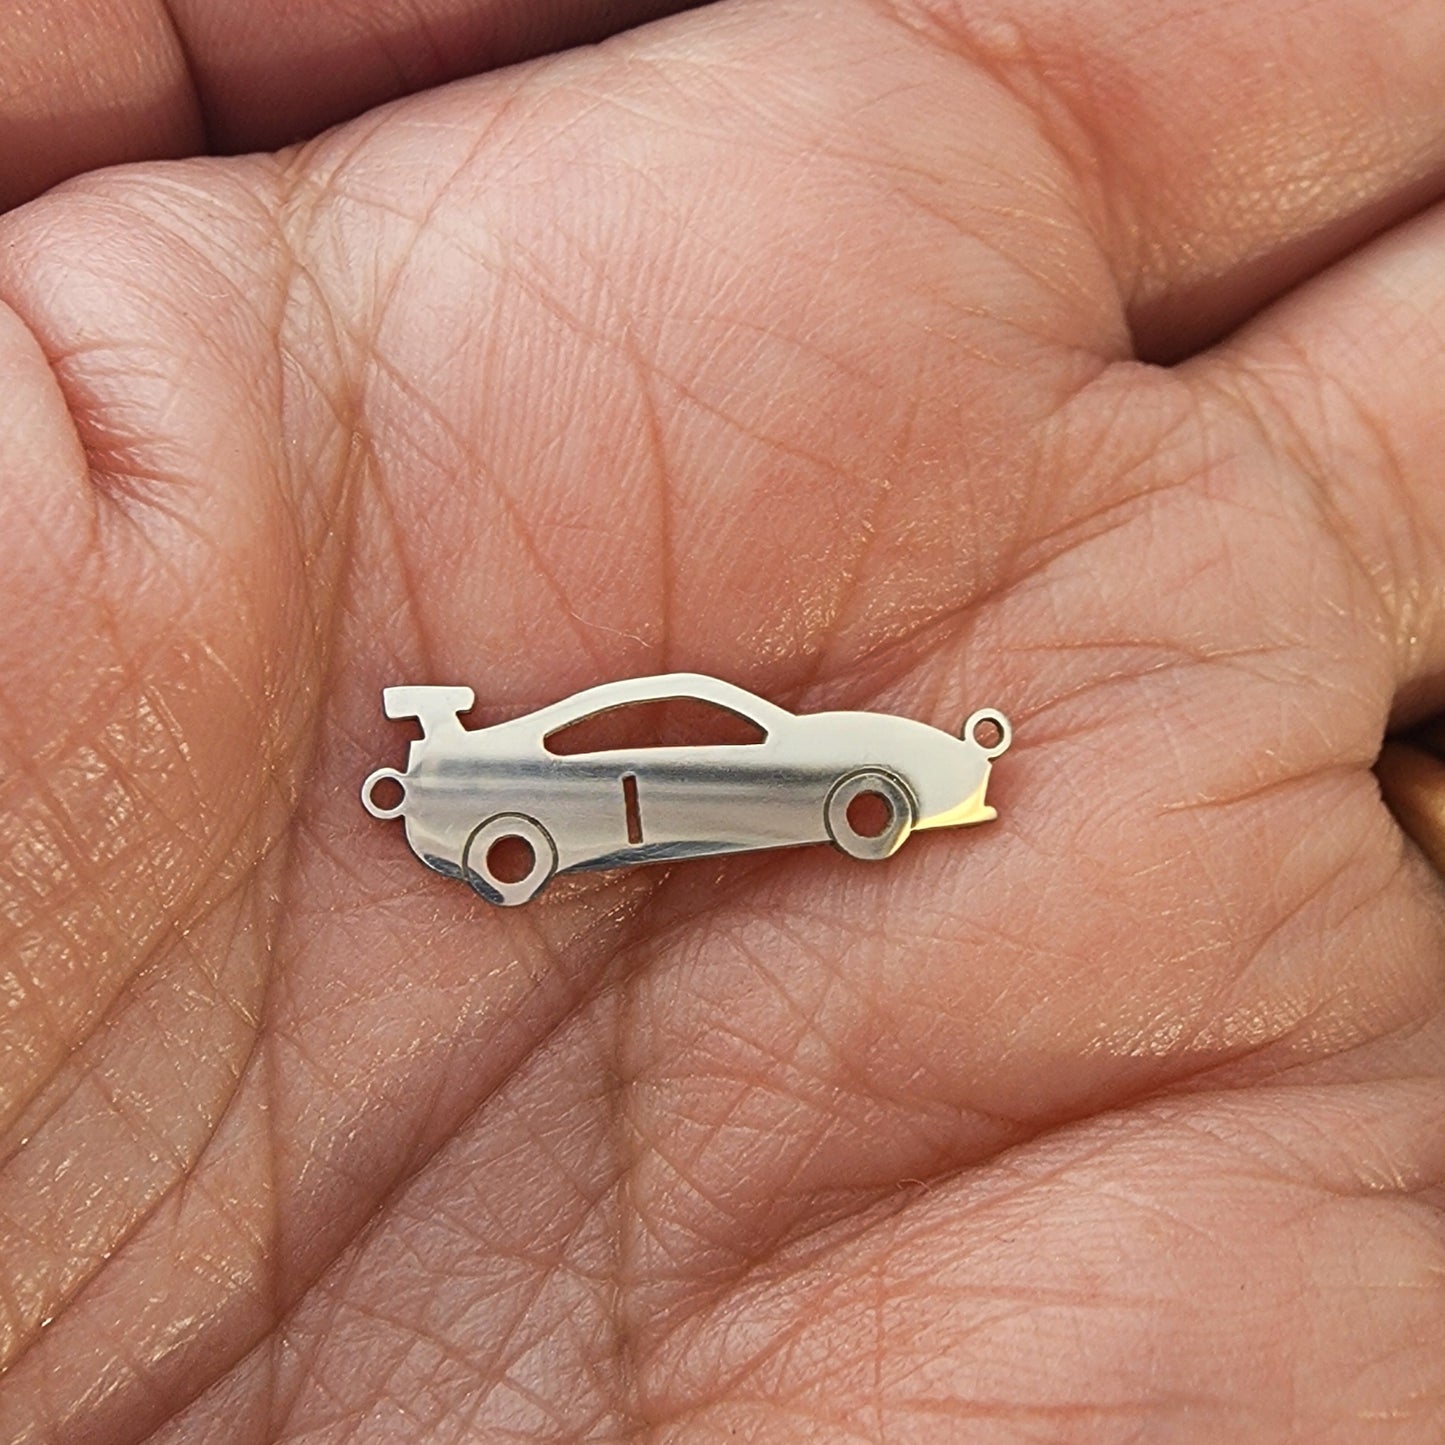 Race Car connector for permanent jewelry, gold filled, sterling silver, 14k and 10k gold